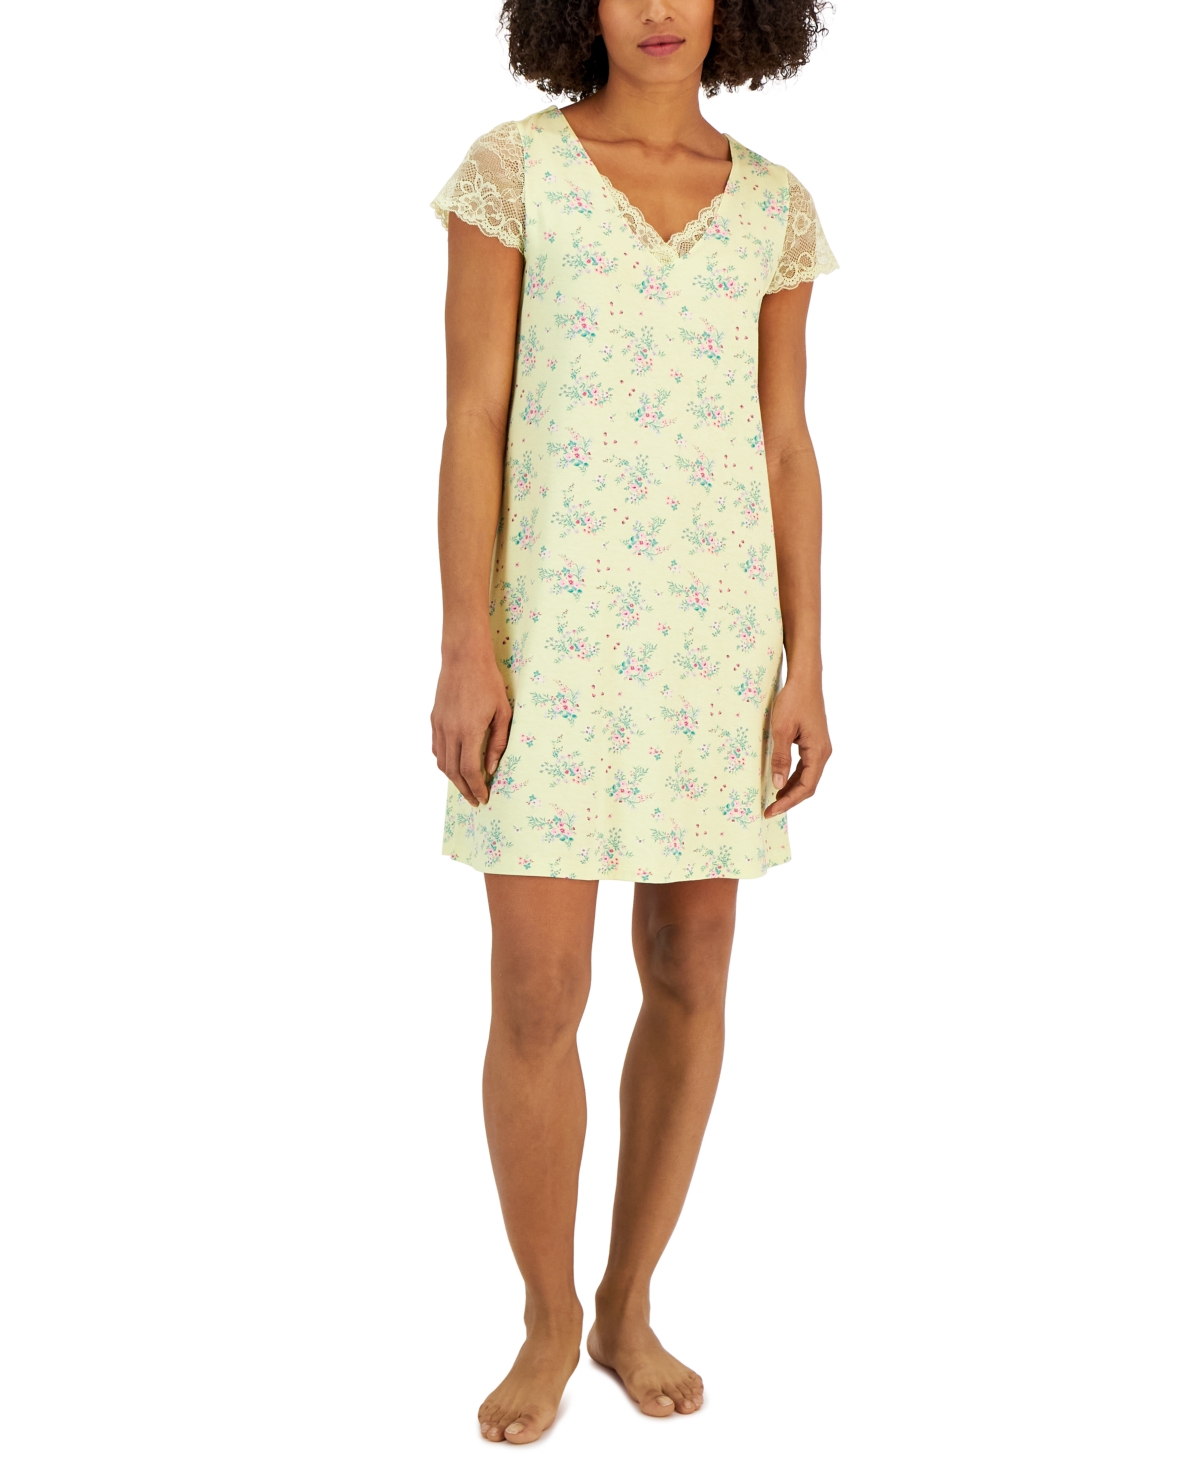 CHARTER CLUB WOMEN'S PRINTED LACE-SLEEVE CHEMISE, CREATED FOR MACY'S